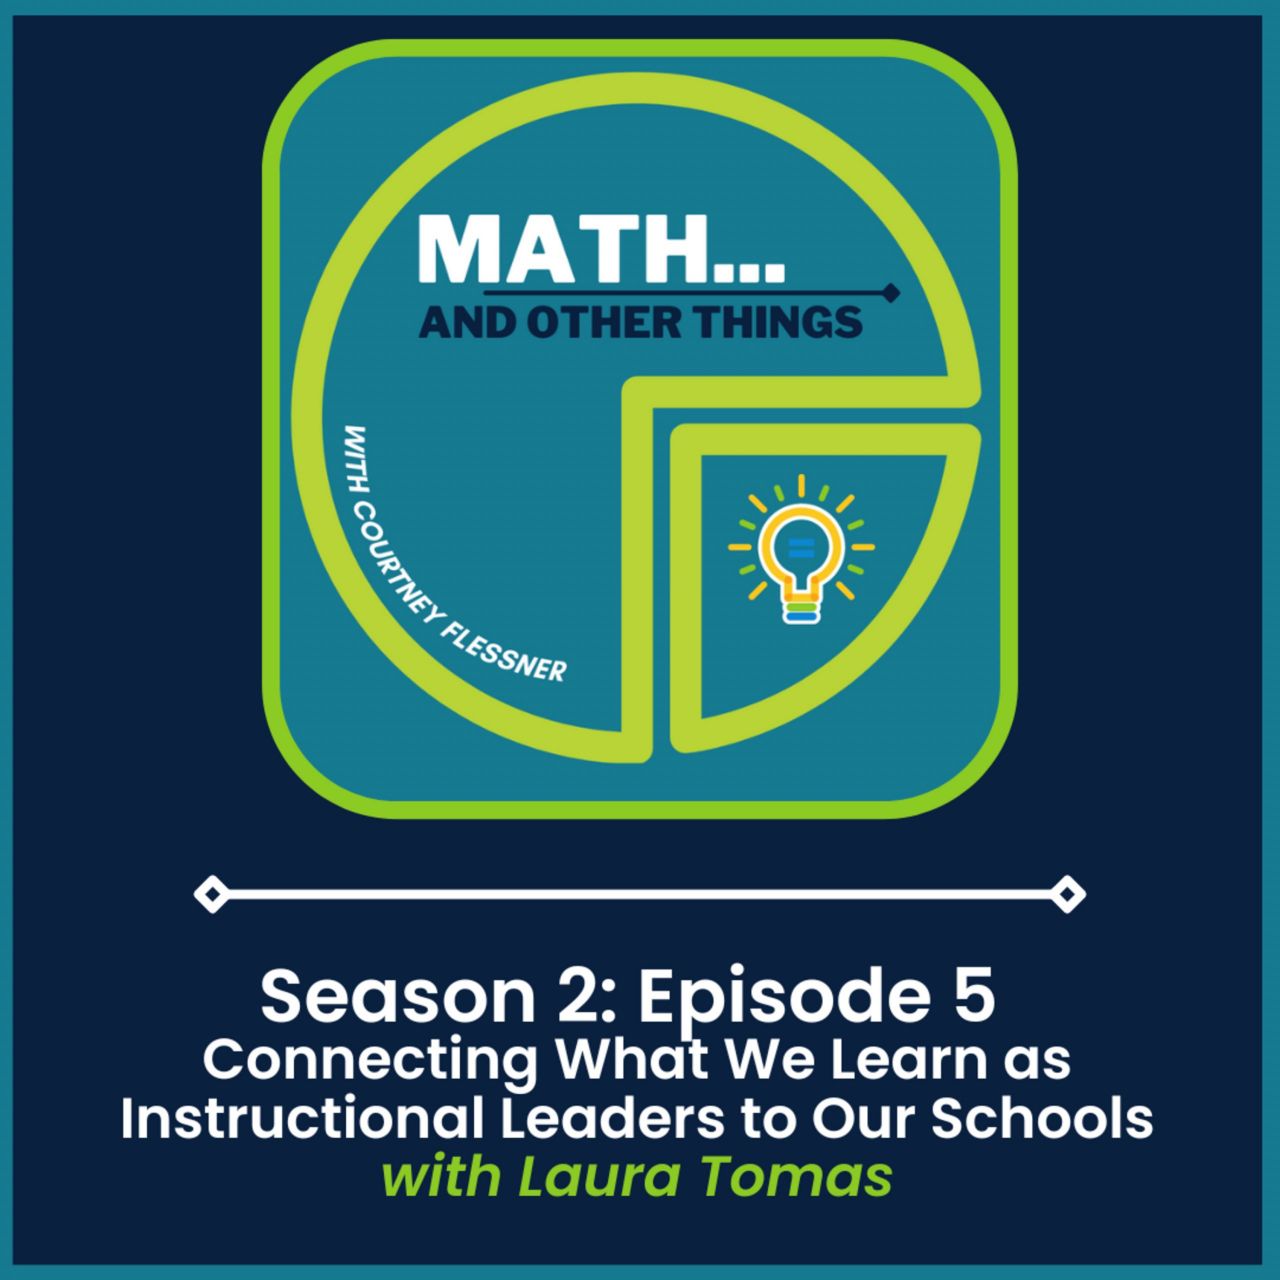 Connecting What We Learn As Instructional Leaders to Our Schools